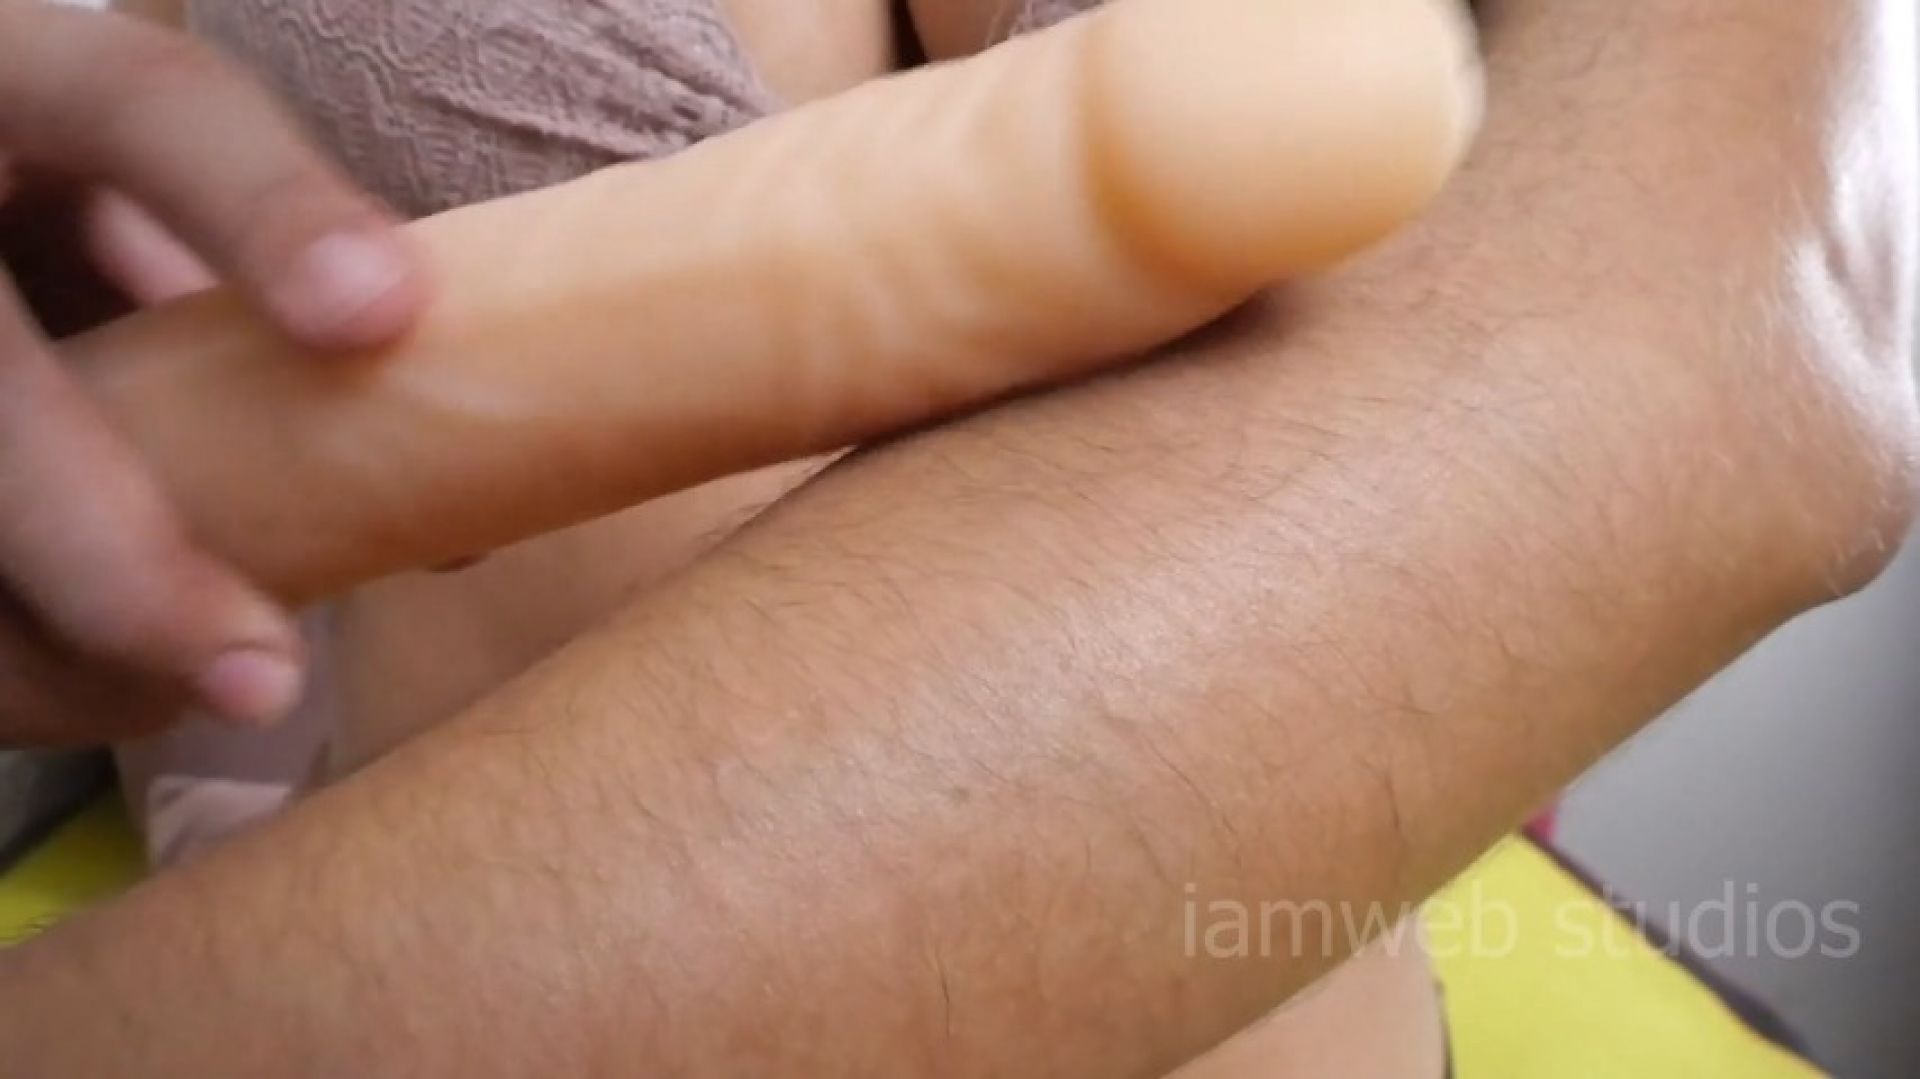 Hairy beauty play with dildos and oil on arms